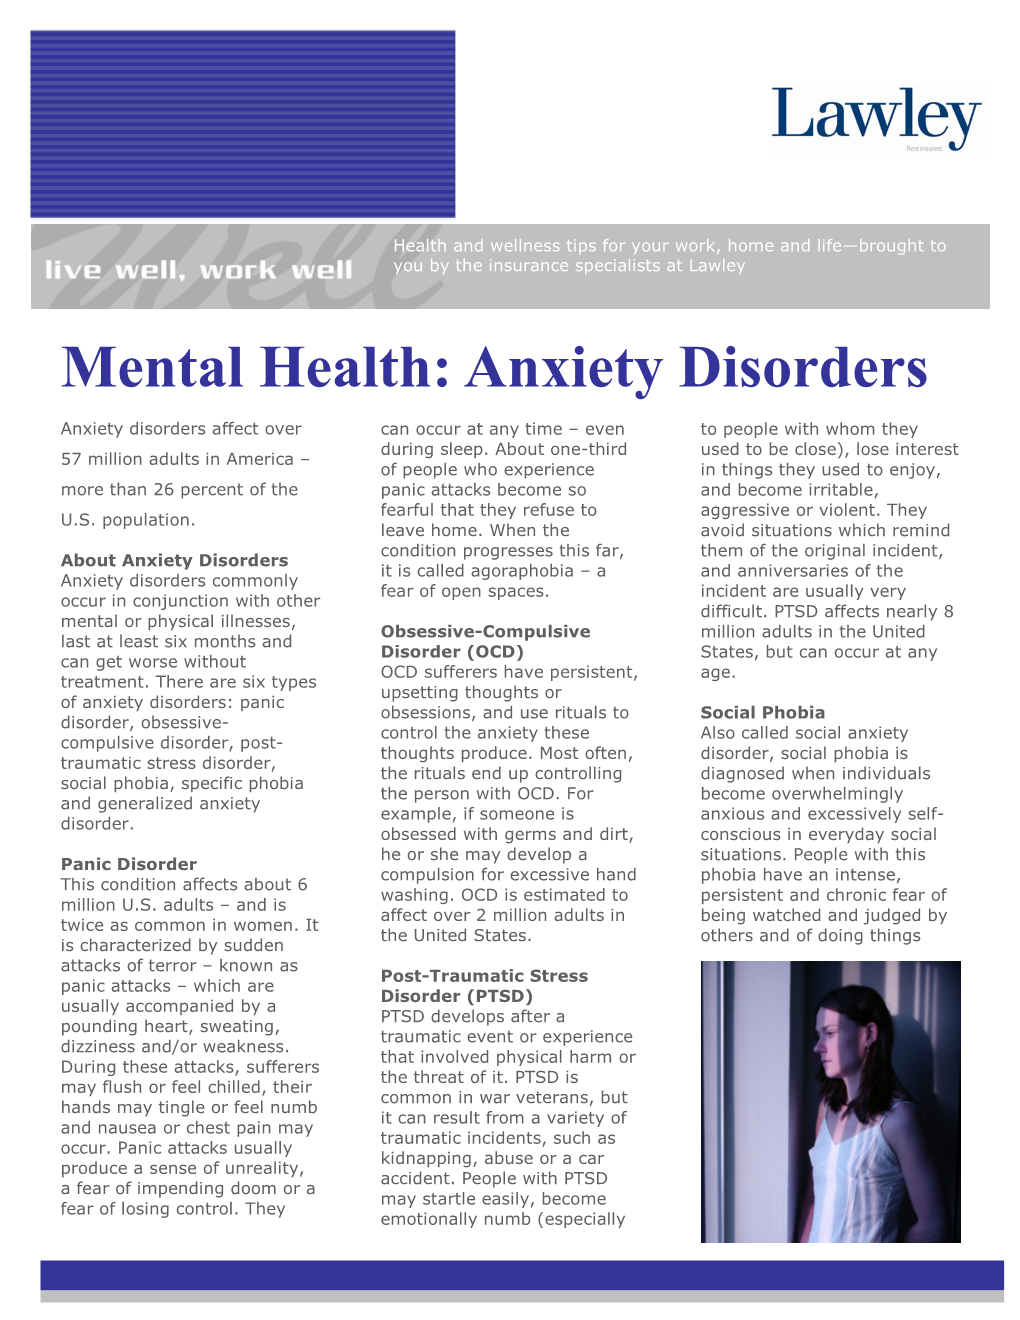 Anxiety Disorders